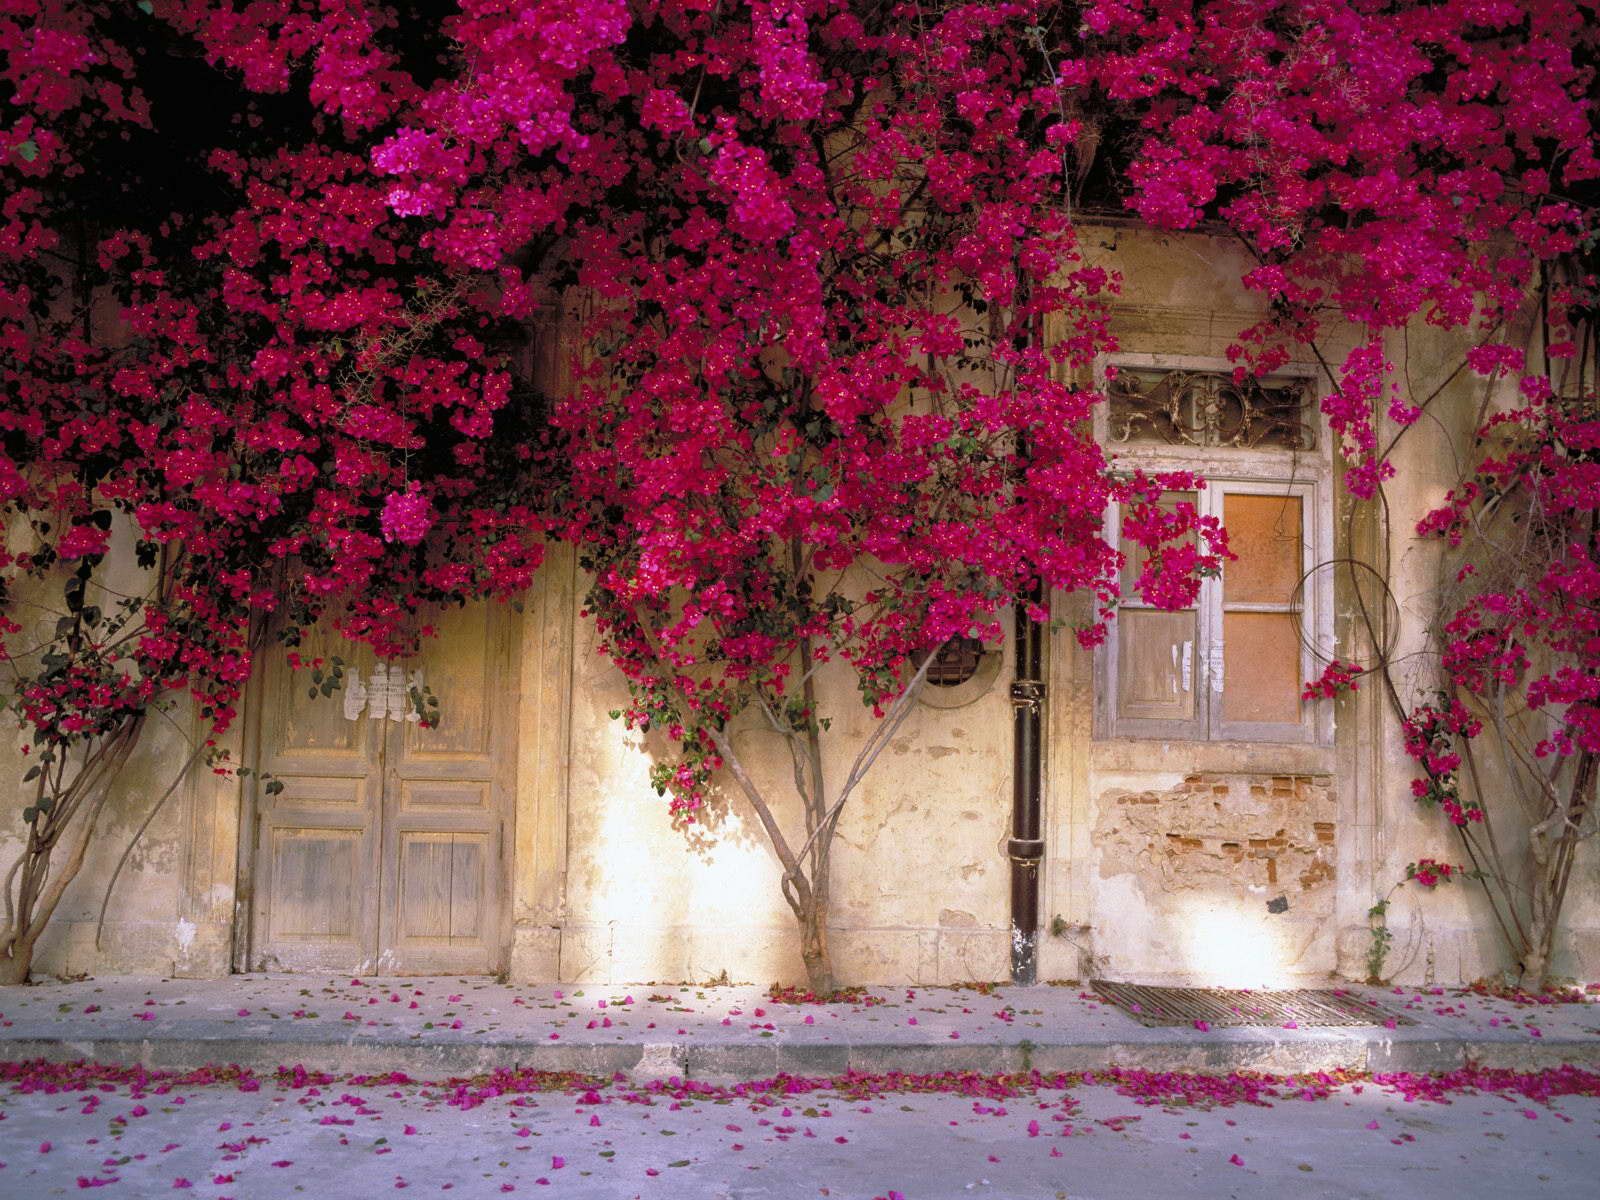 hot-pink-flower-trees-in-front-of-an-old-house-1600x1200-wide-wallpapers-net